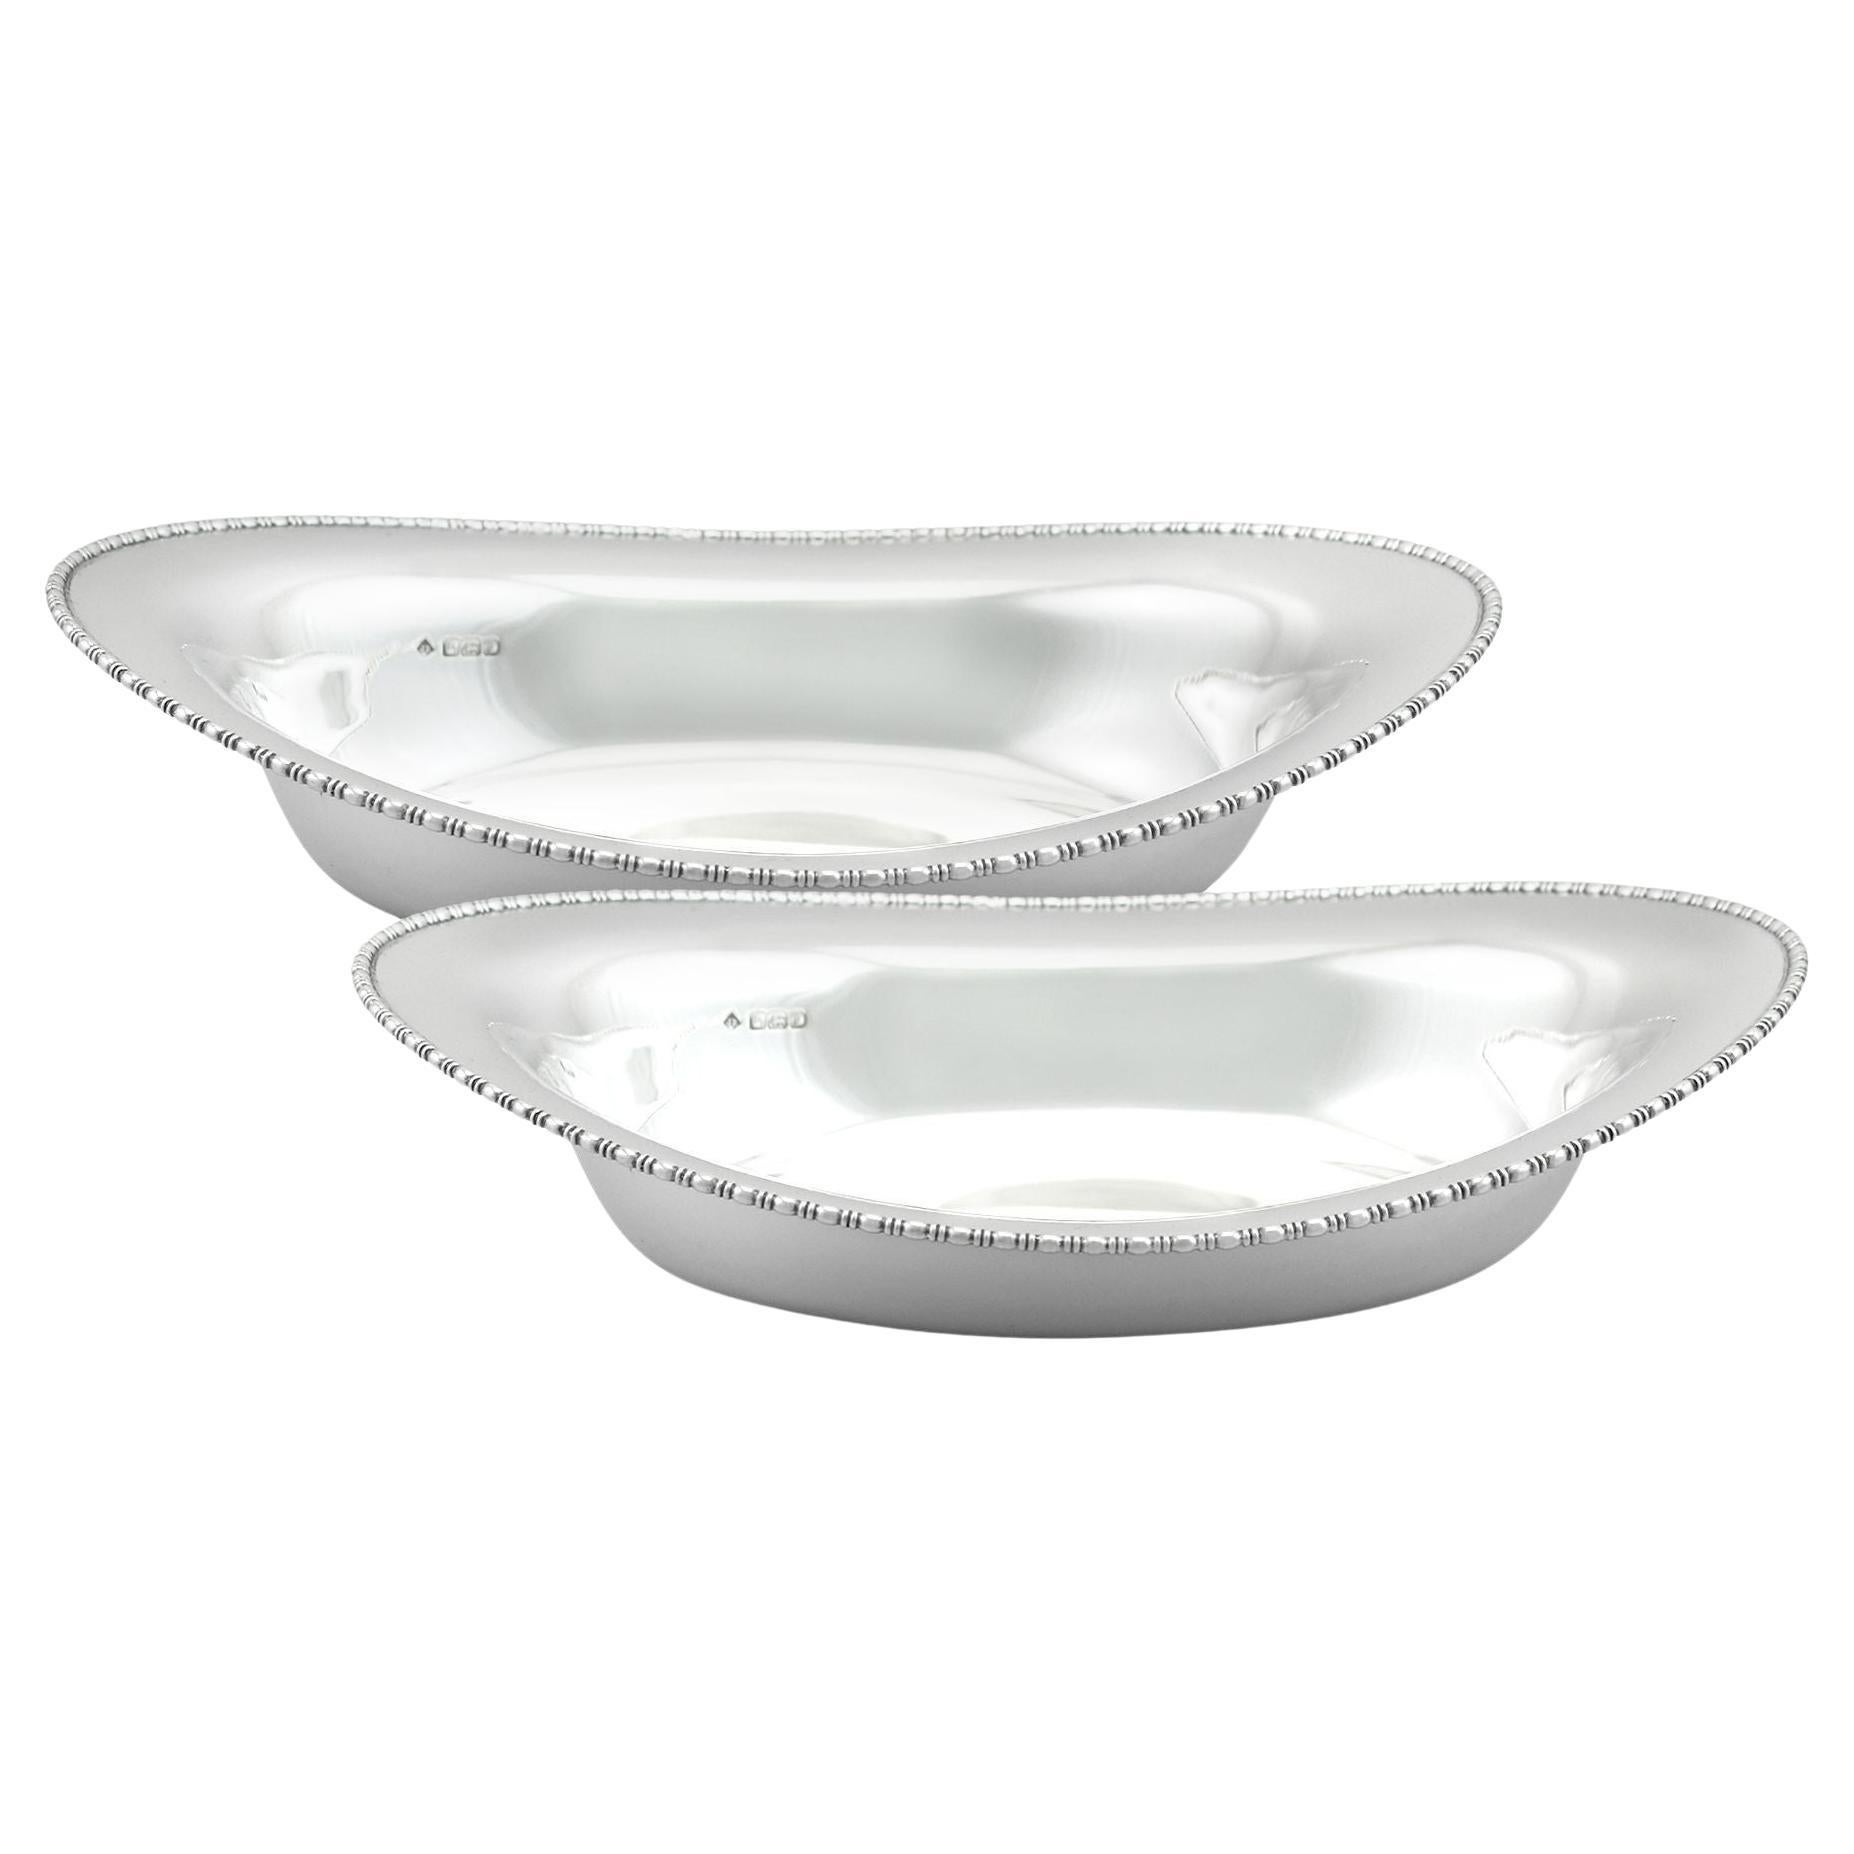 James Ramsay English Sterling Silver Bread Dishes